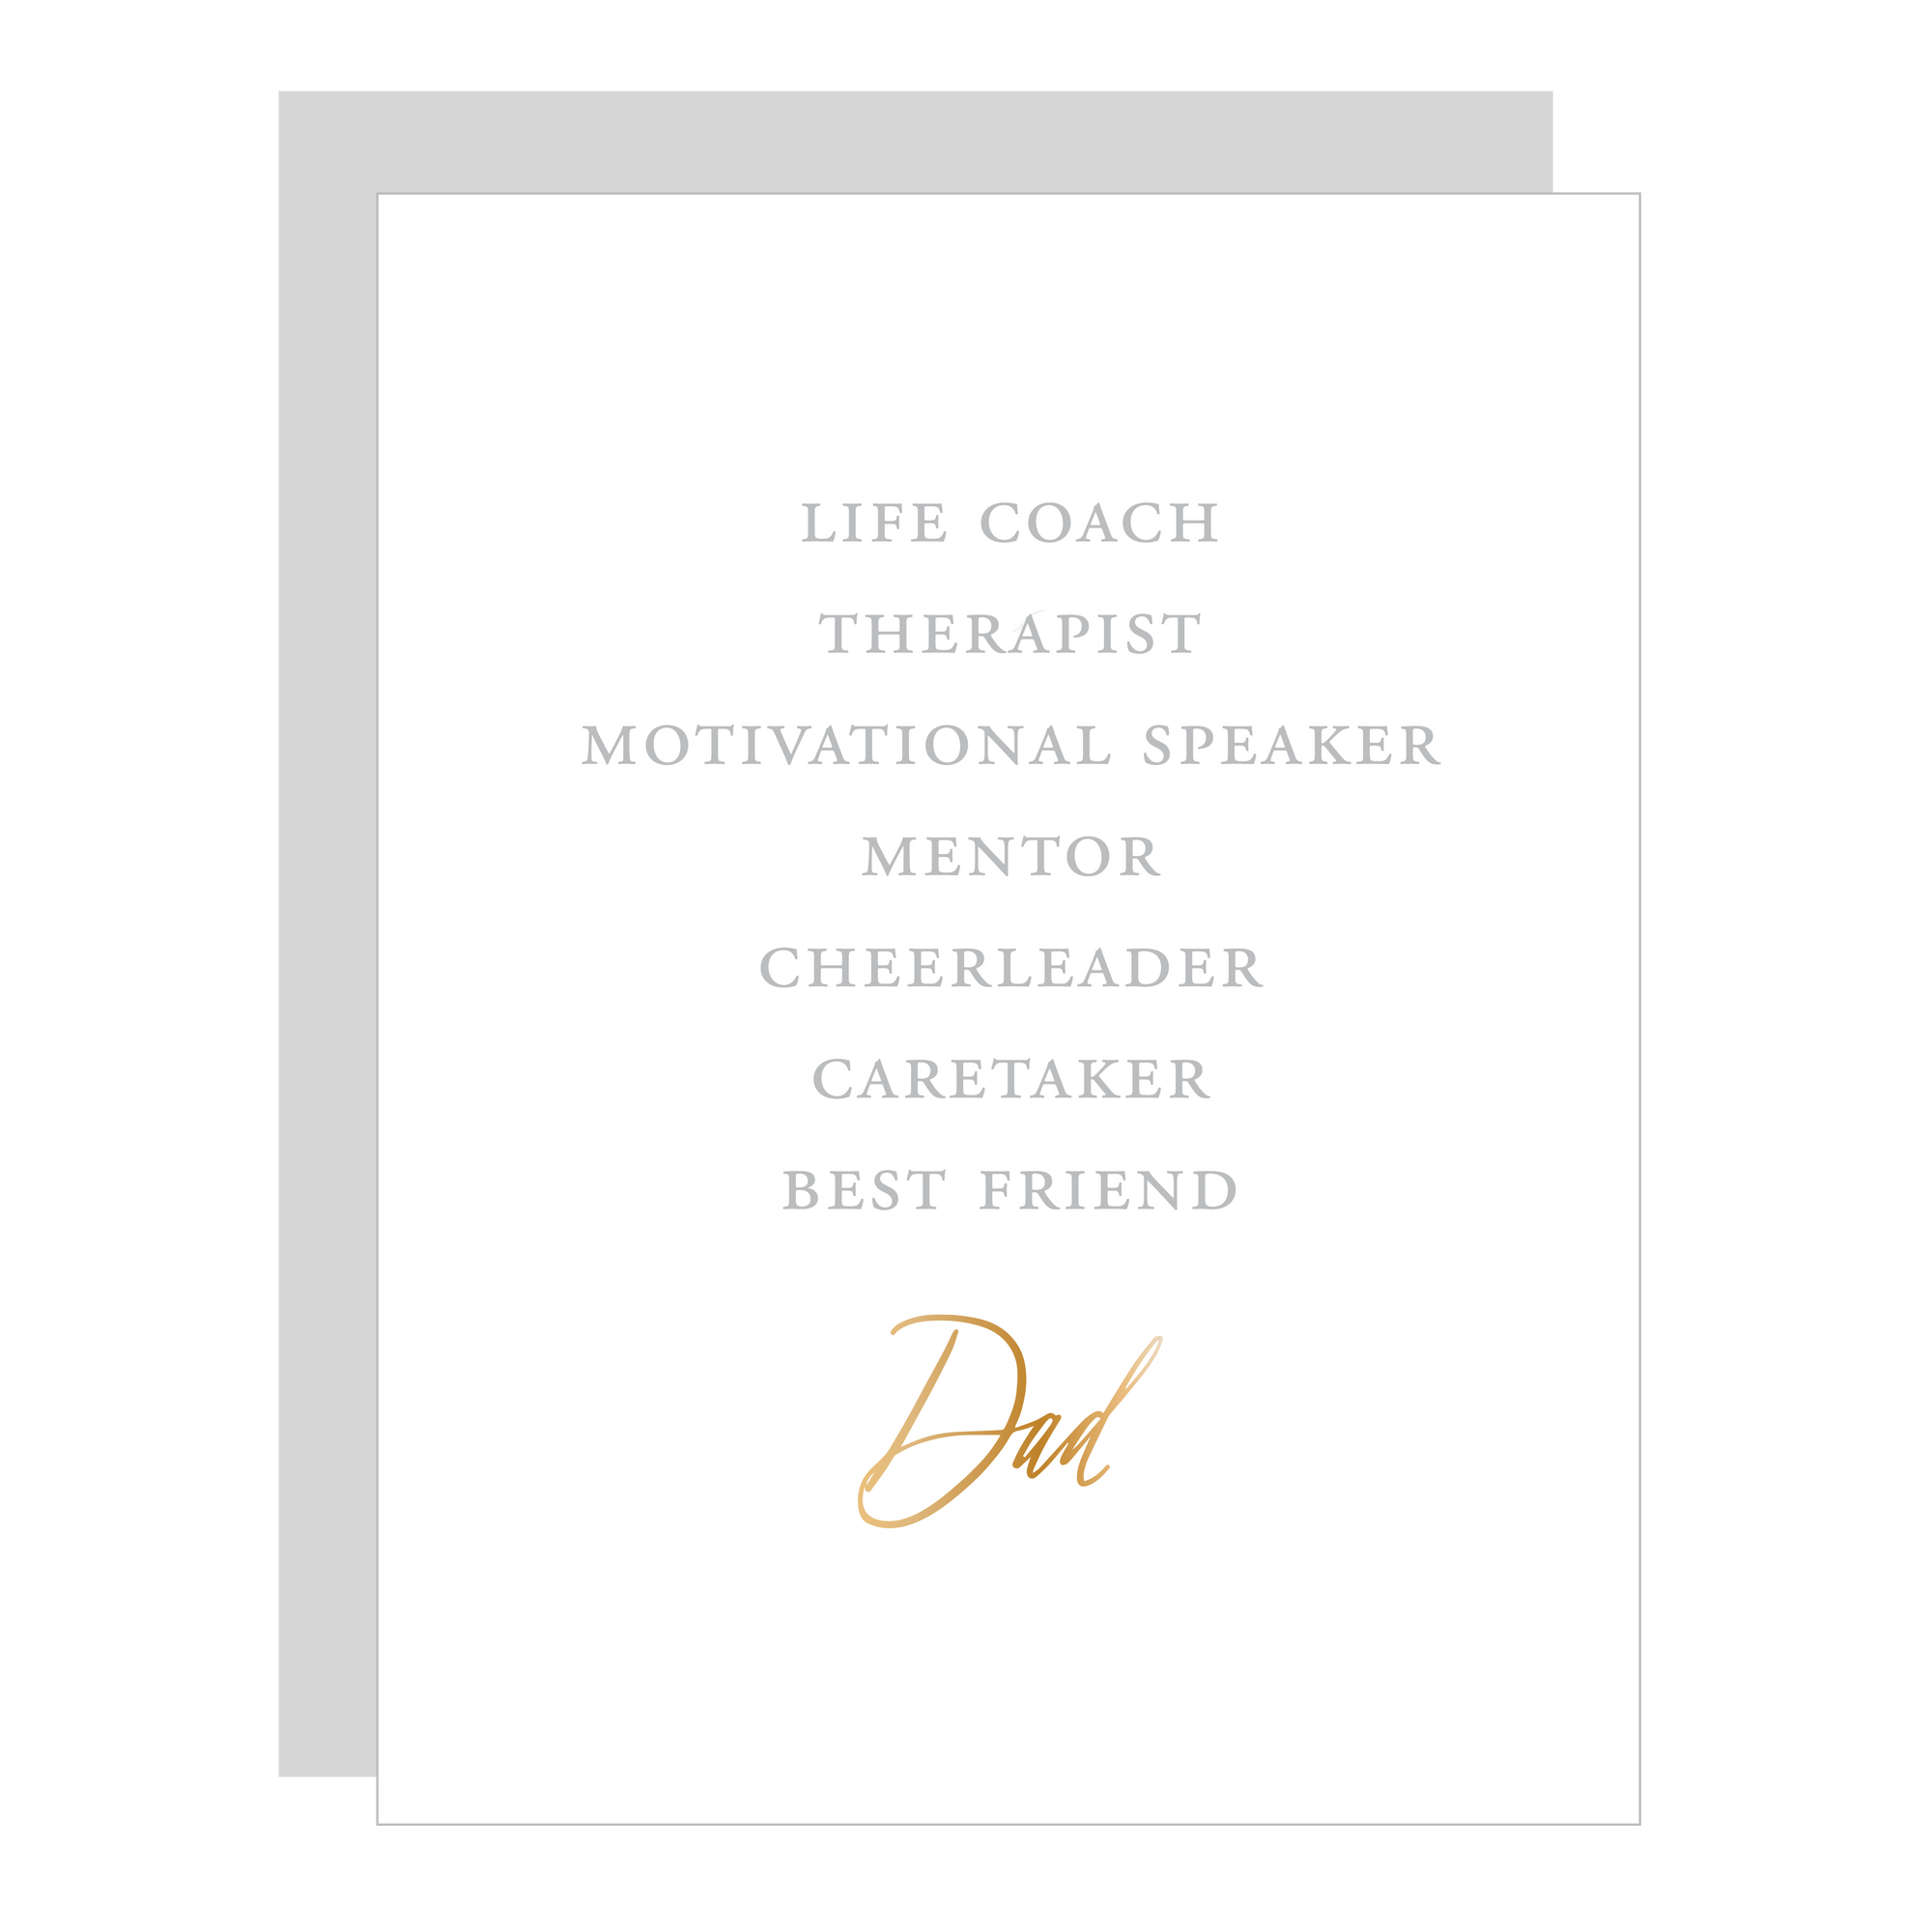 Our "Best Friend, Dad" card, letterpress printed by hand and foil printed